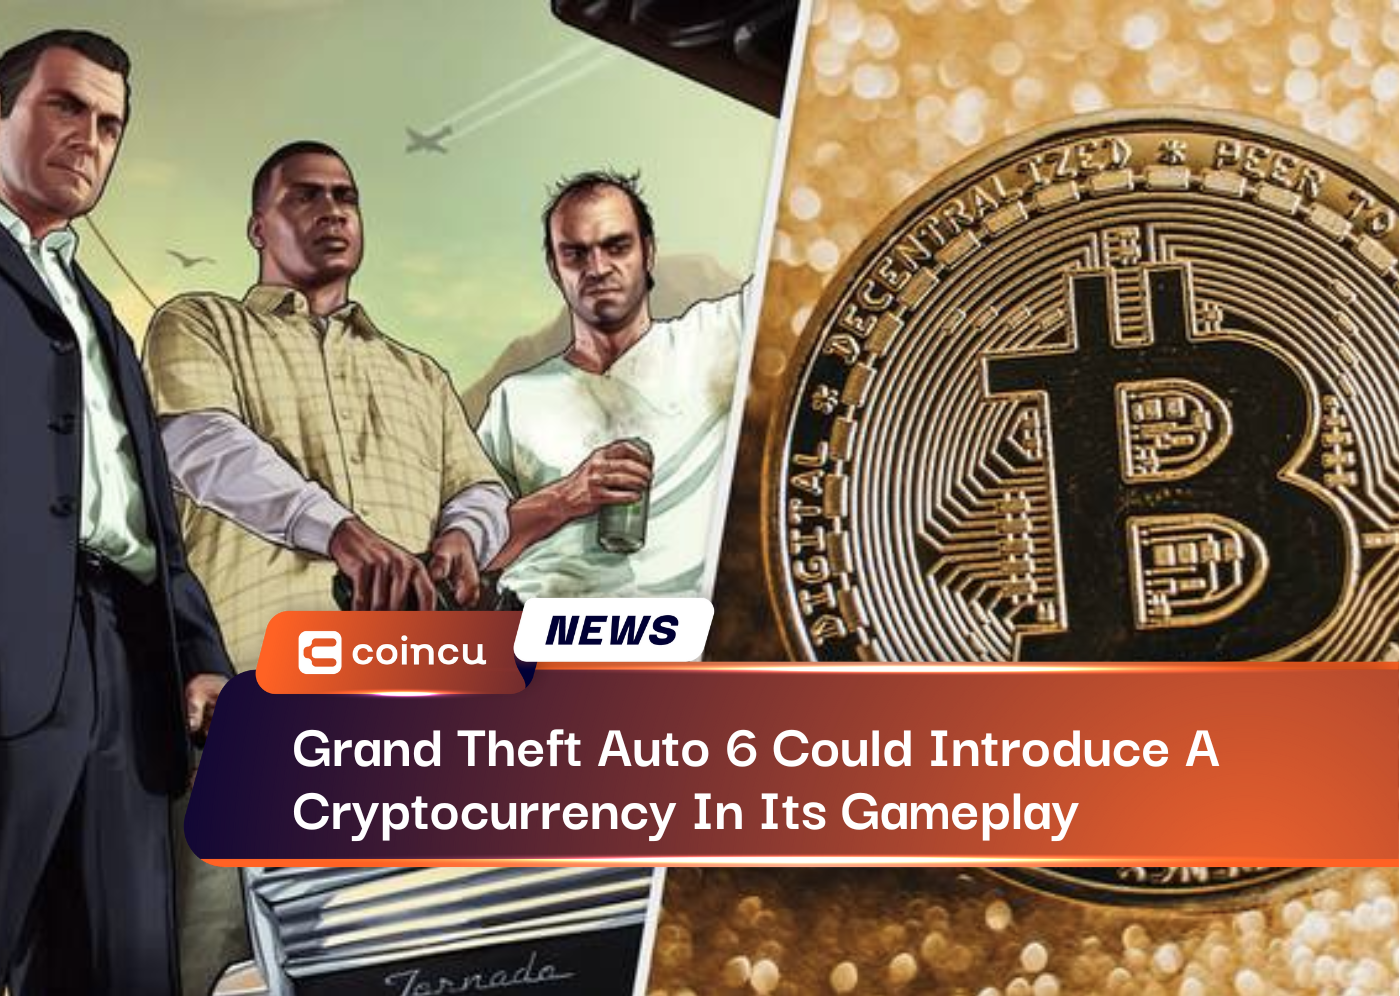 Grand Theft Auto: Trilogy Released, but Where Can We Get GTA with Crypto on  Blockchain? - DailyCoin